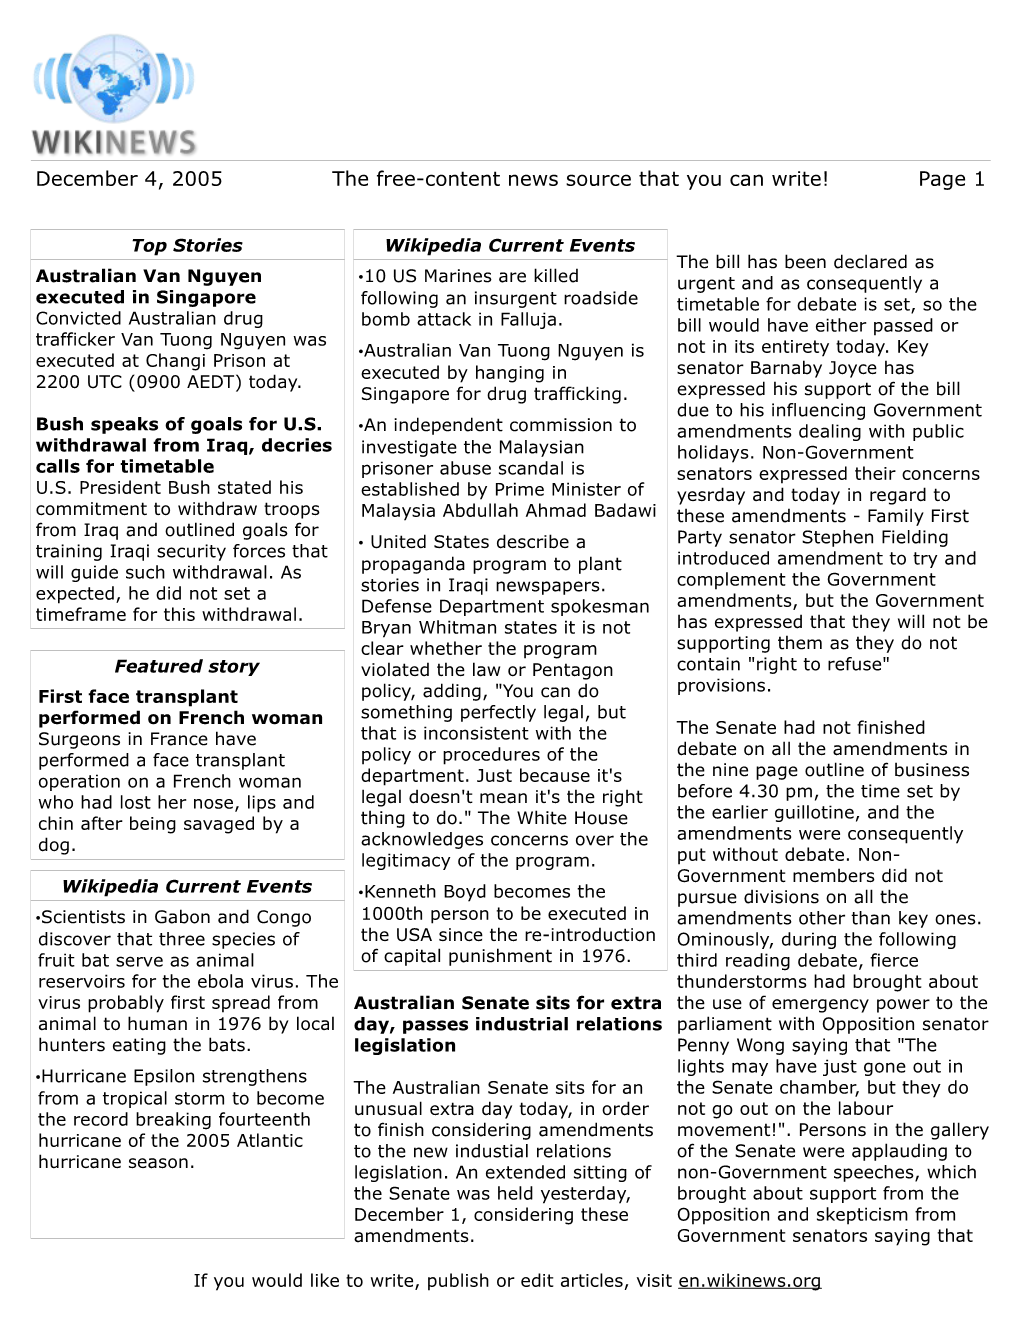 December 4, 2005 the Free-Content News Source That You Can Write! Page 1